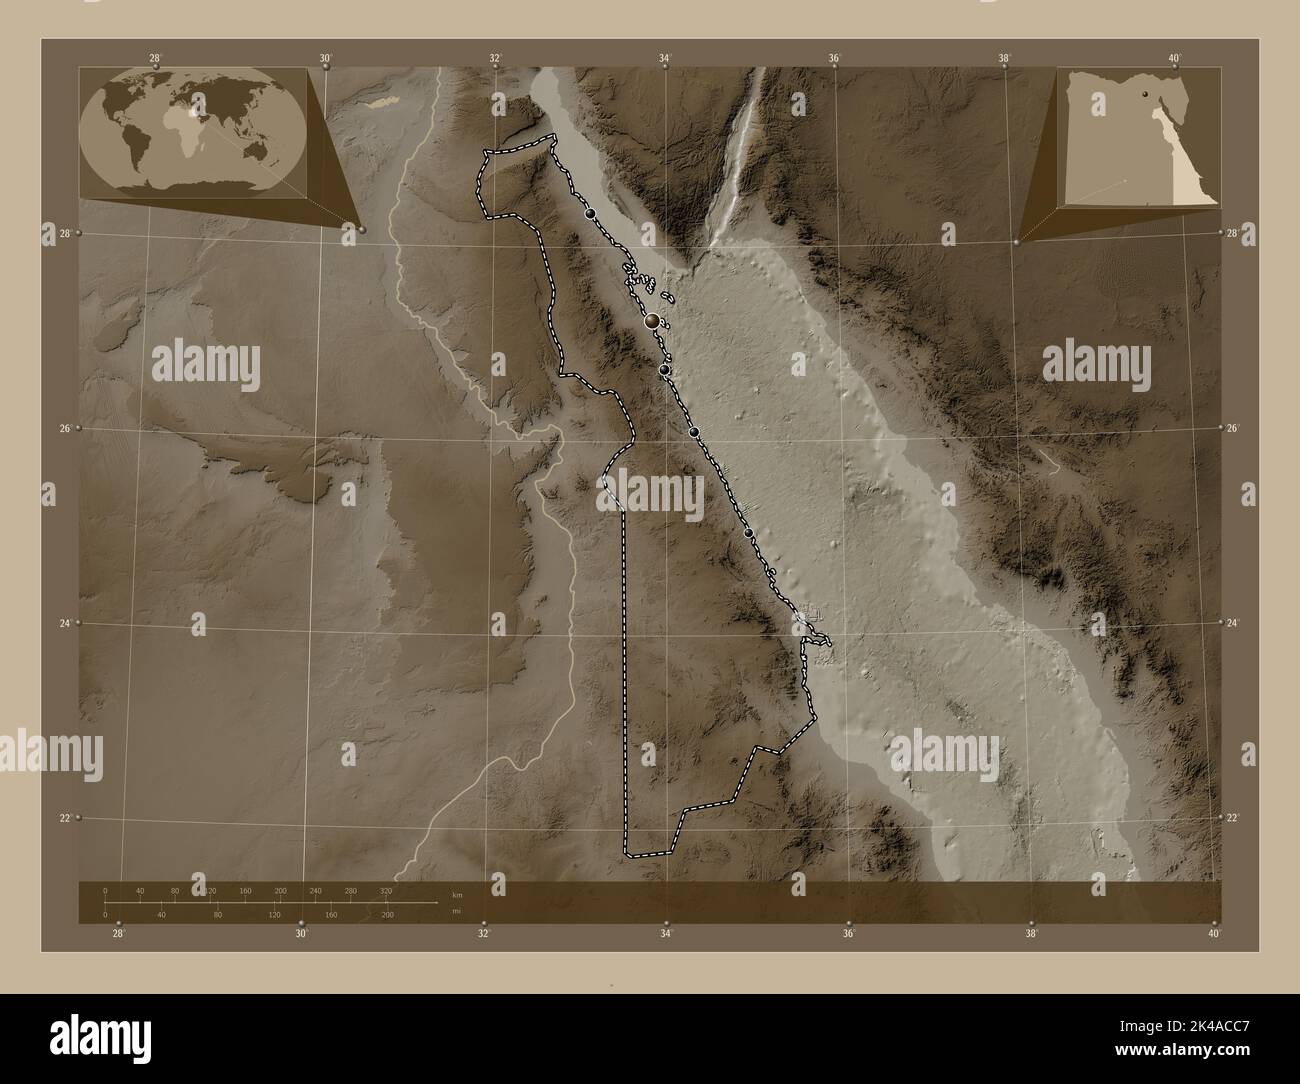 Al Bahr al Ahmar, governorate of Egypt. Elevation map colored in sepia tones with lakes and rivers. Locations of major cities of the region. Corner au Stock Photo